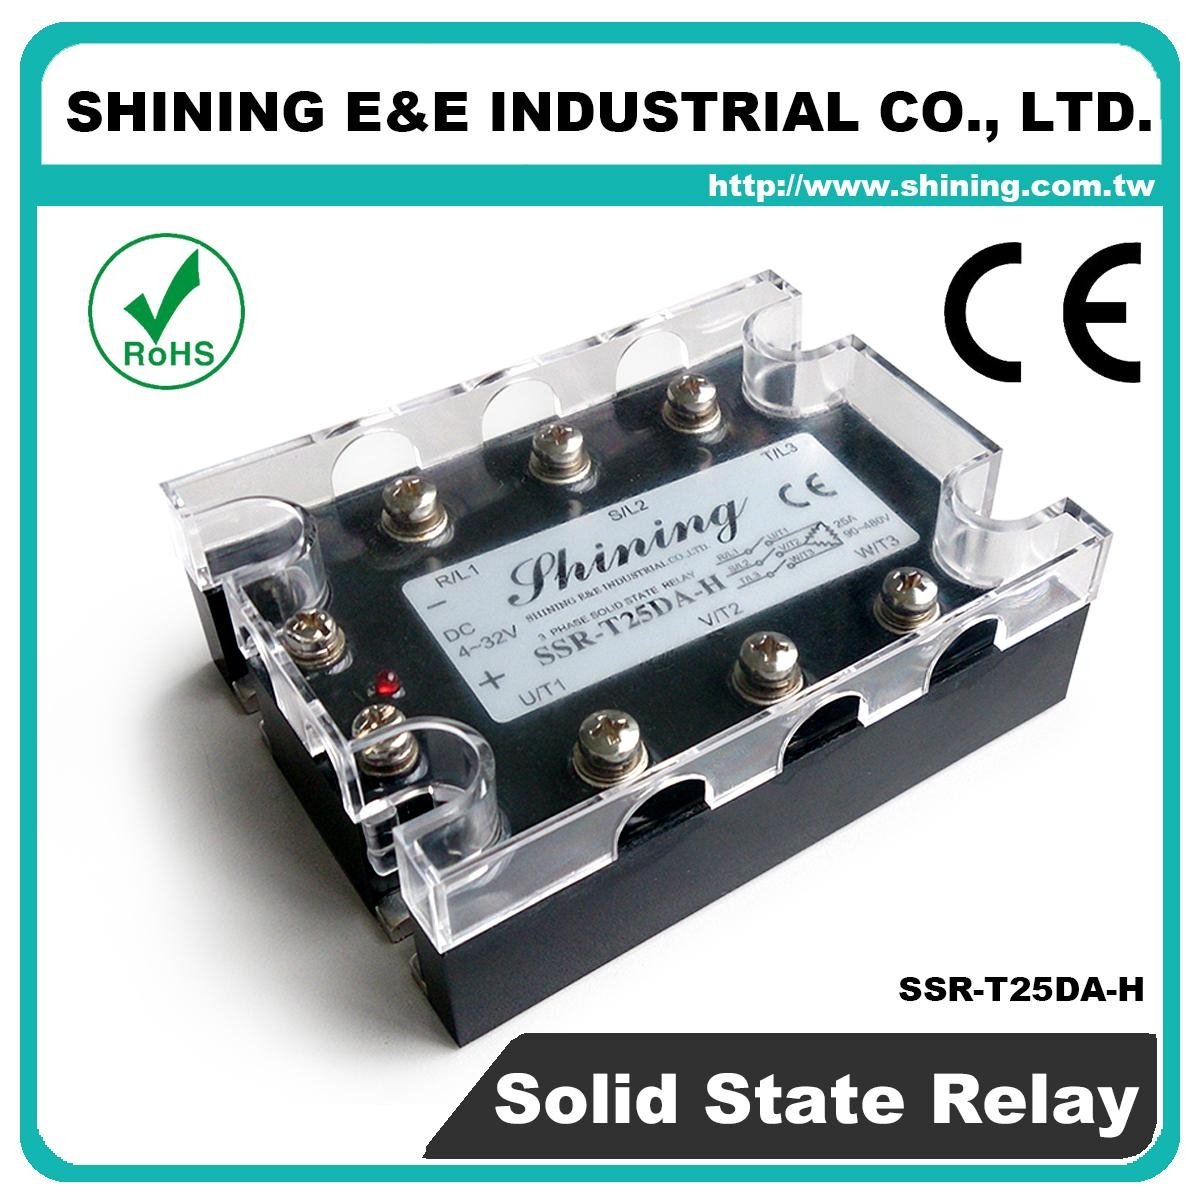 SSR-T25DA-H DC to AC Zero Cross Three Phase 25A Solid State Relay 5